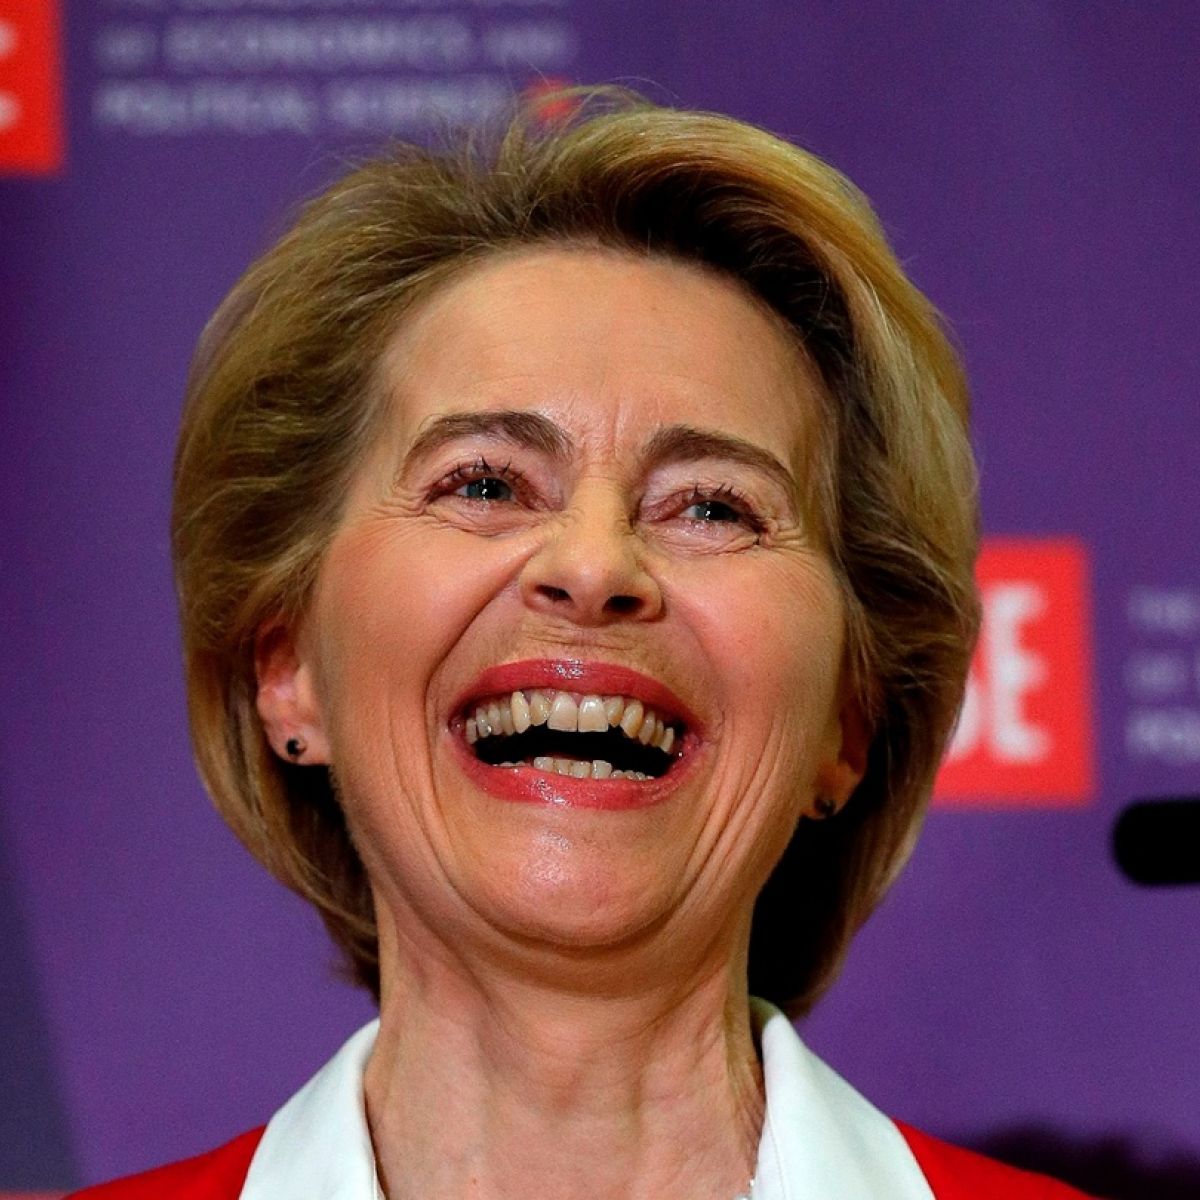 Ursula Von Der Leyen Ursula Von Der Leyen Biography President Of The